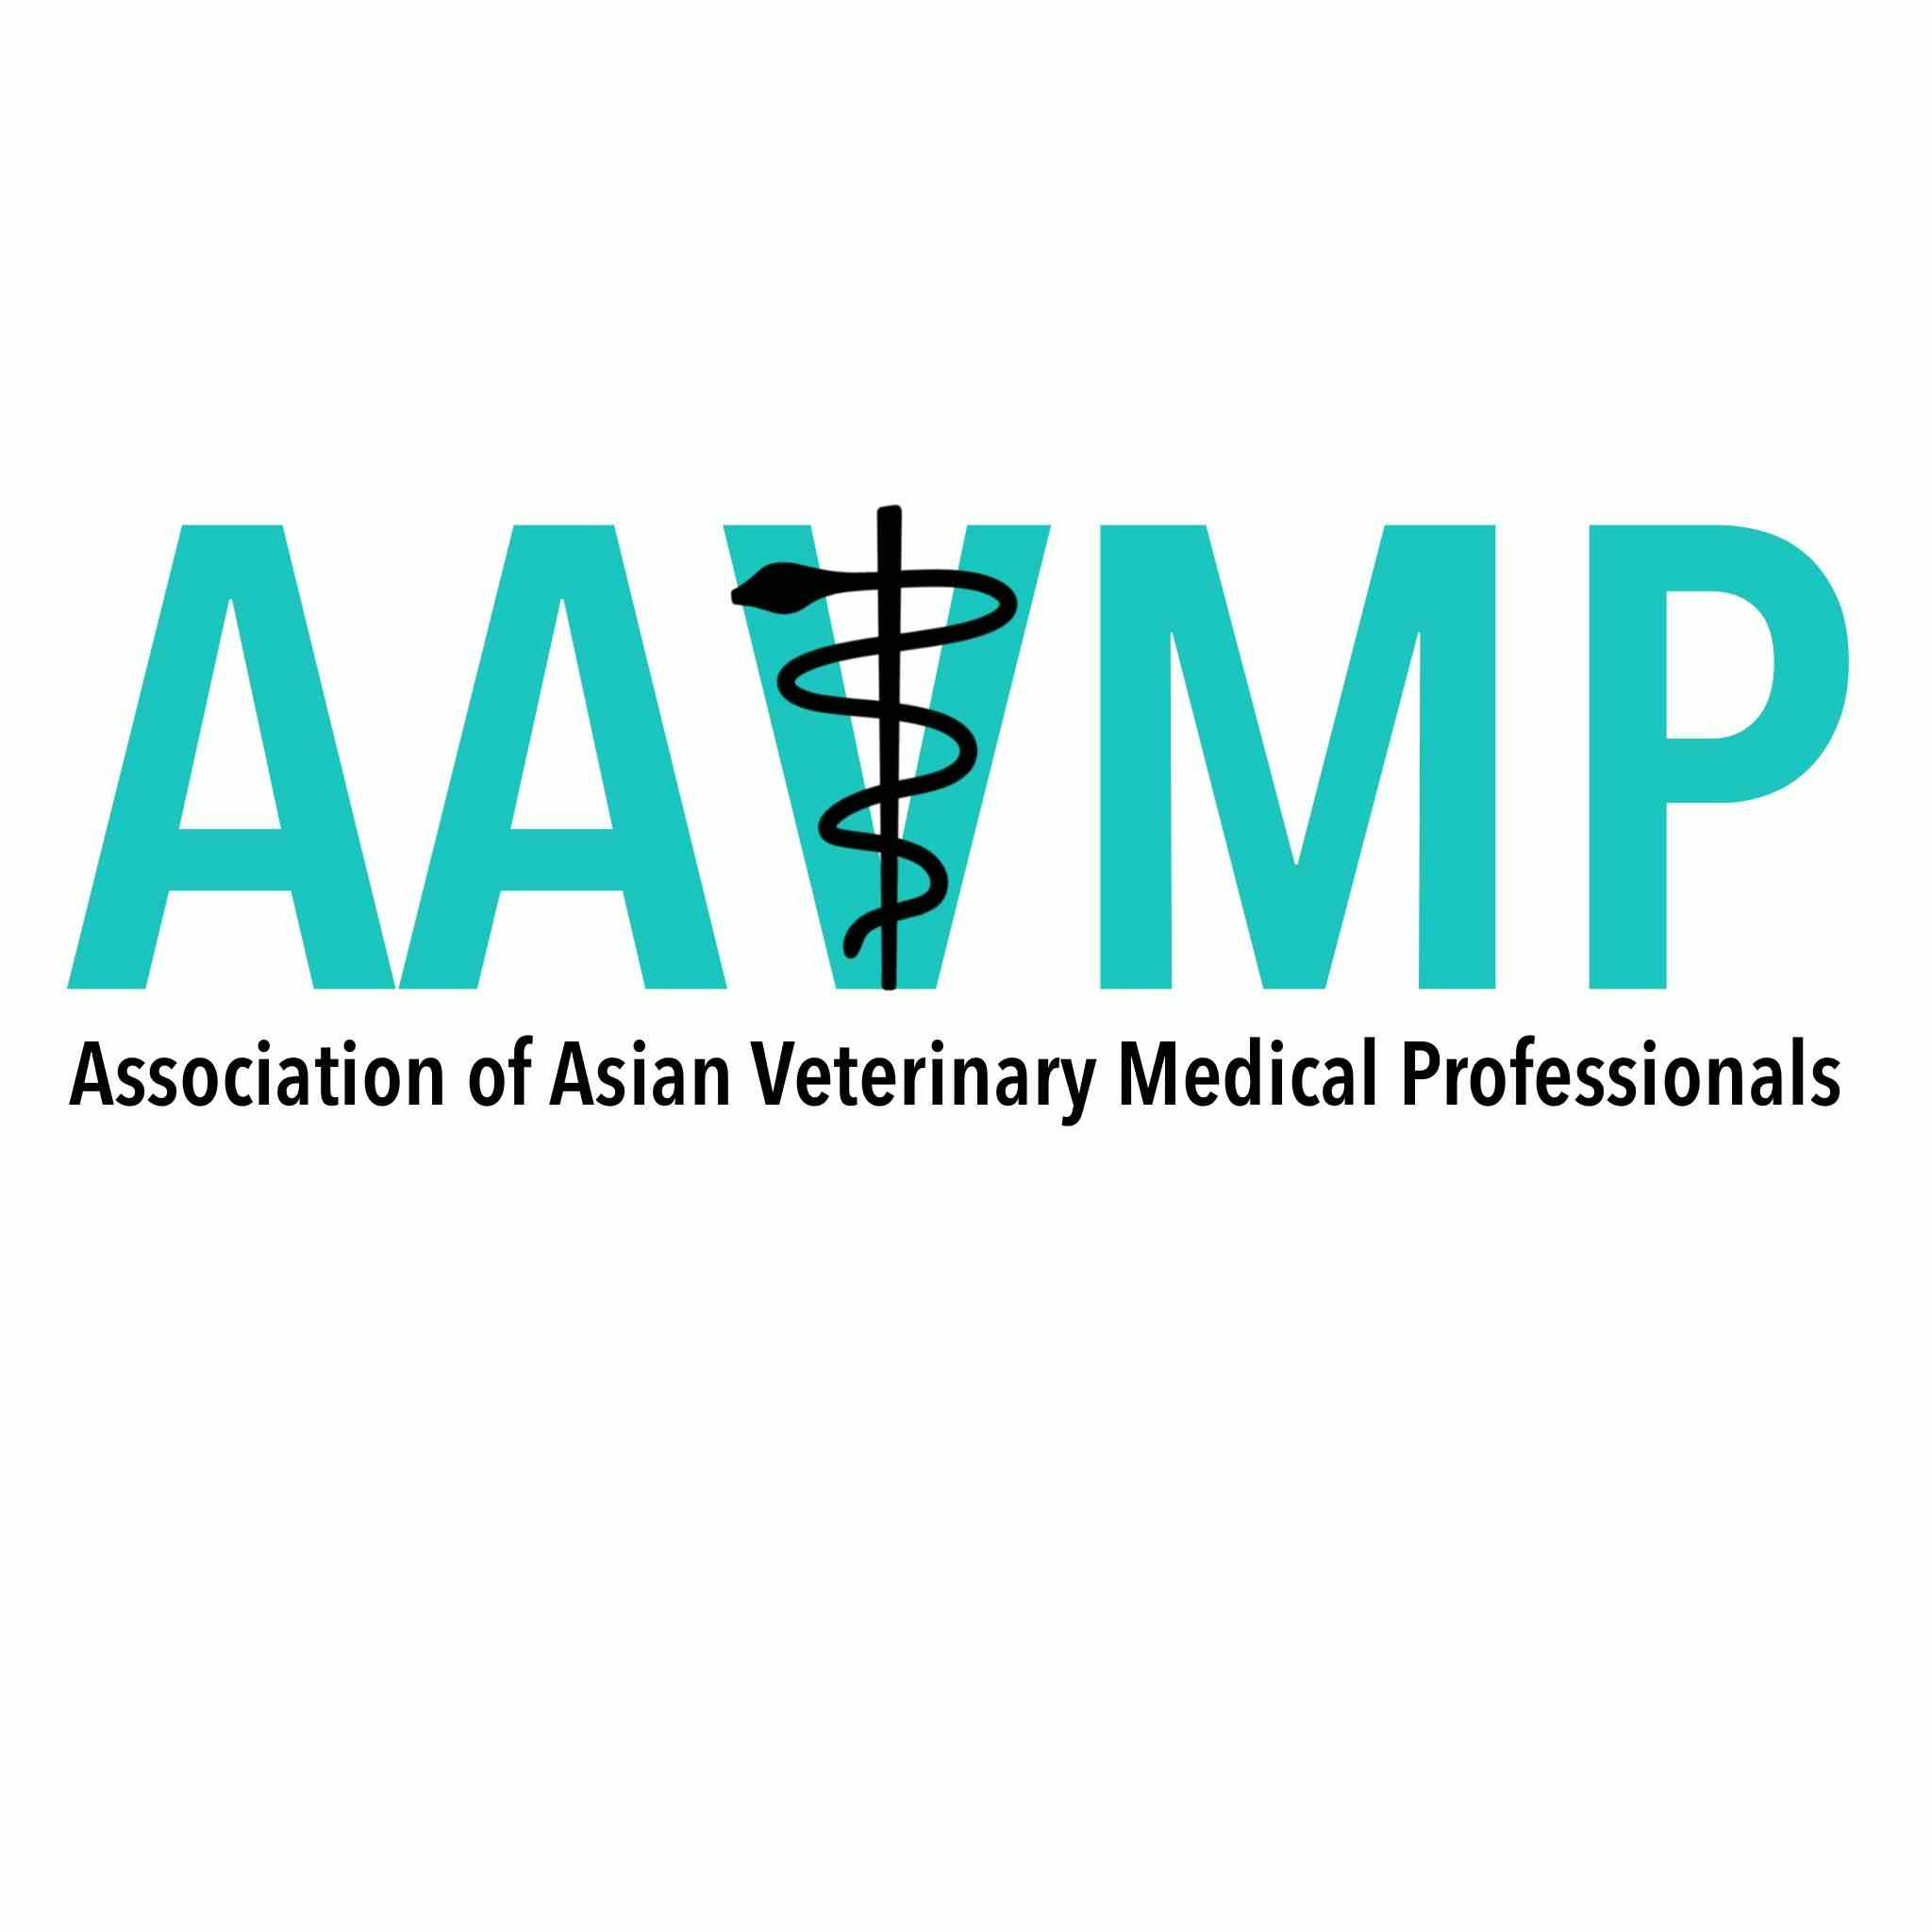 Co-founders of AAVMP